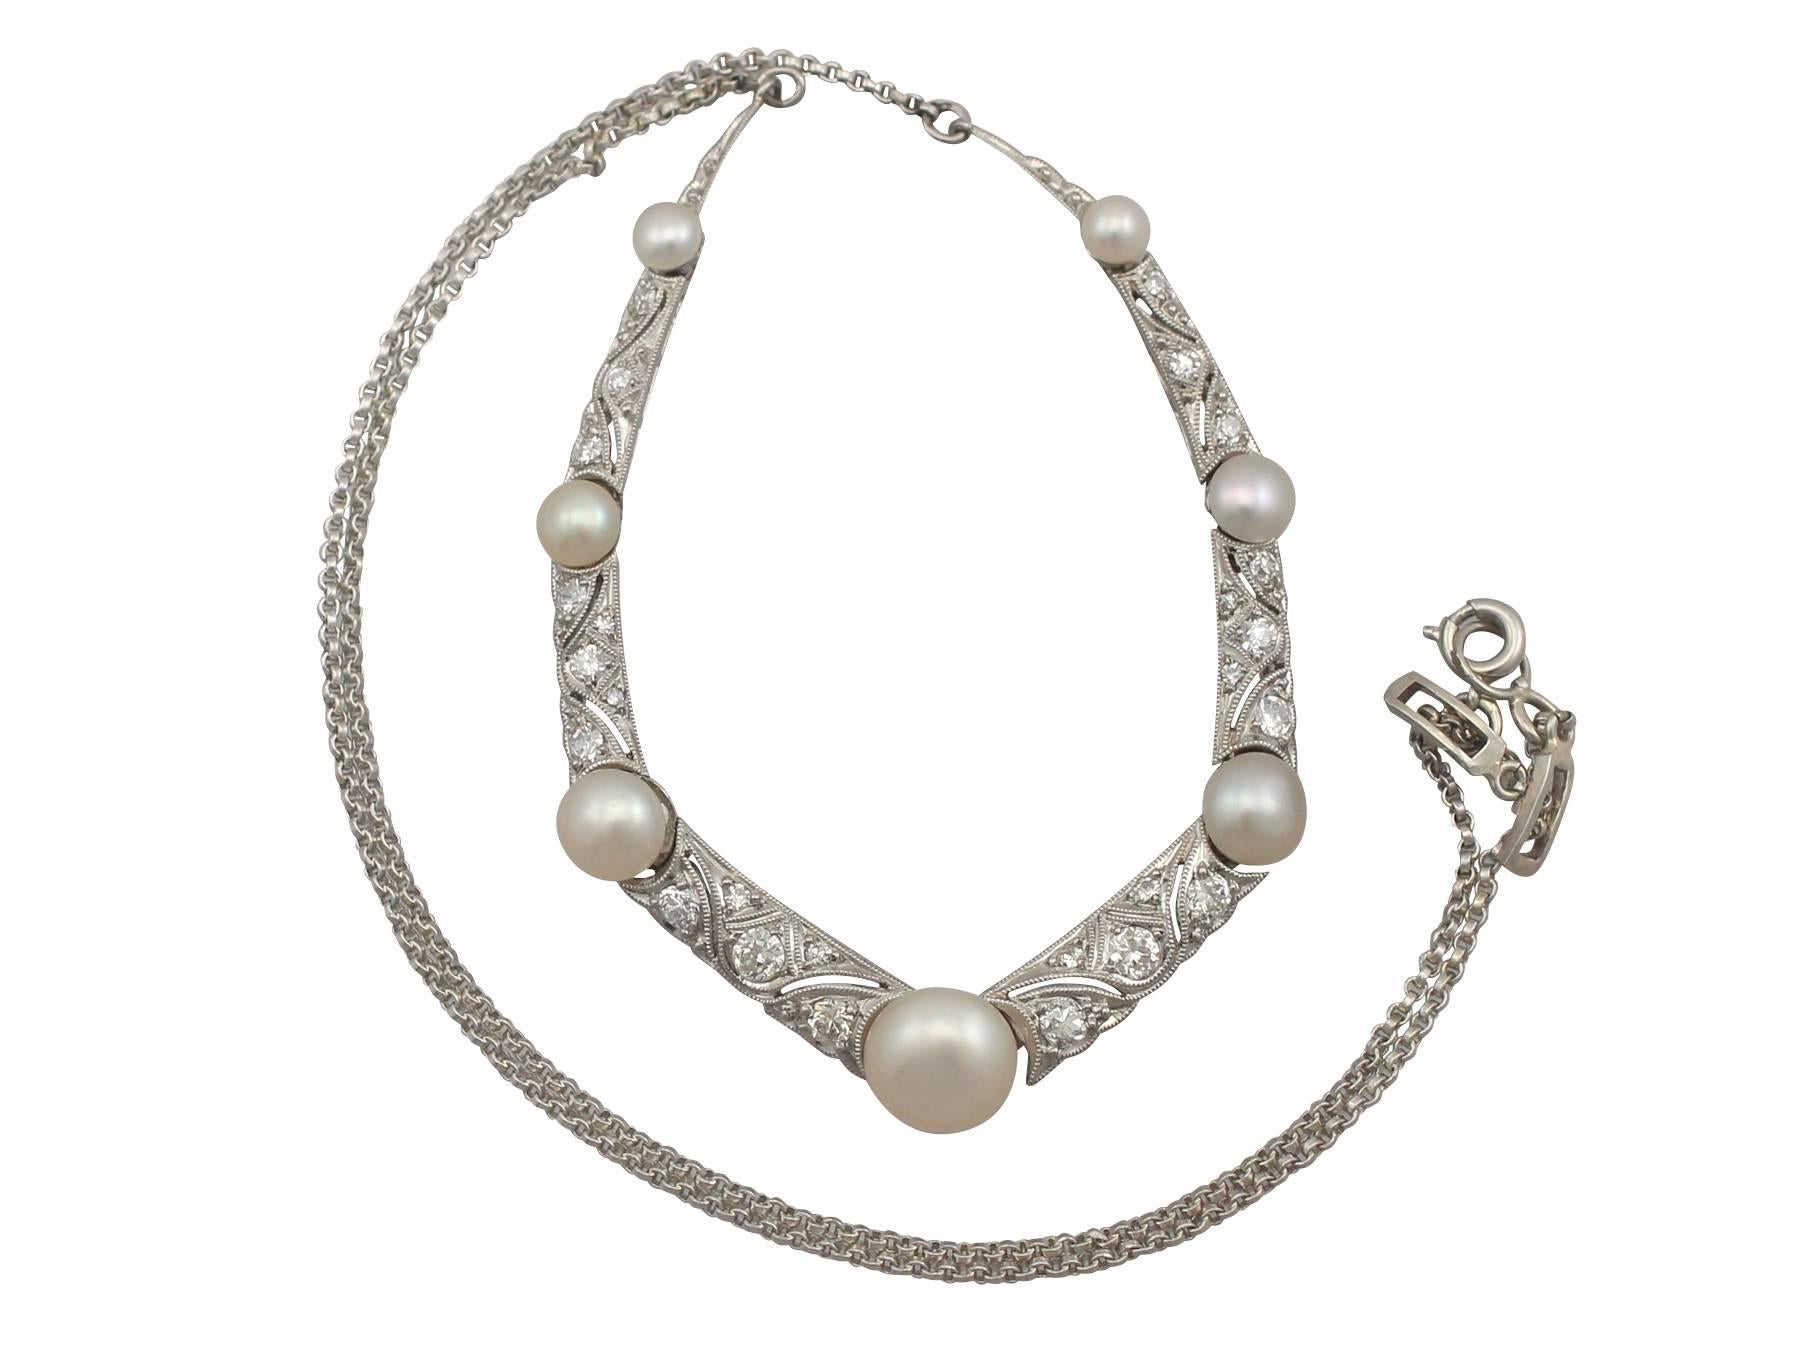 A stunning antique 0.97 carat diamond, pearl and platinum collarette style necklace; part of our diverse antique jewelry and estate jewelry collections

This stunning, fine and impressive antique collarette necklace has been crafted in